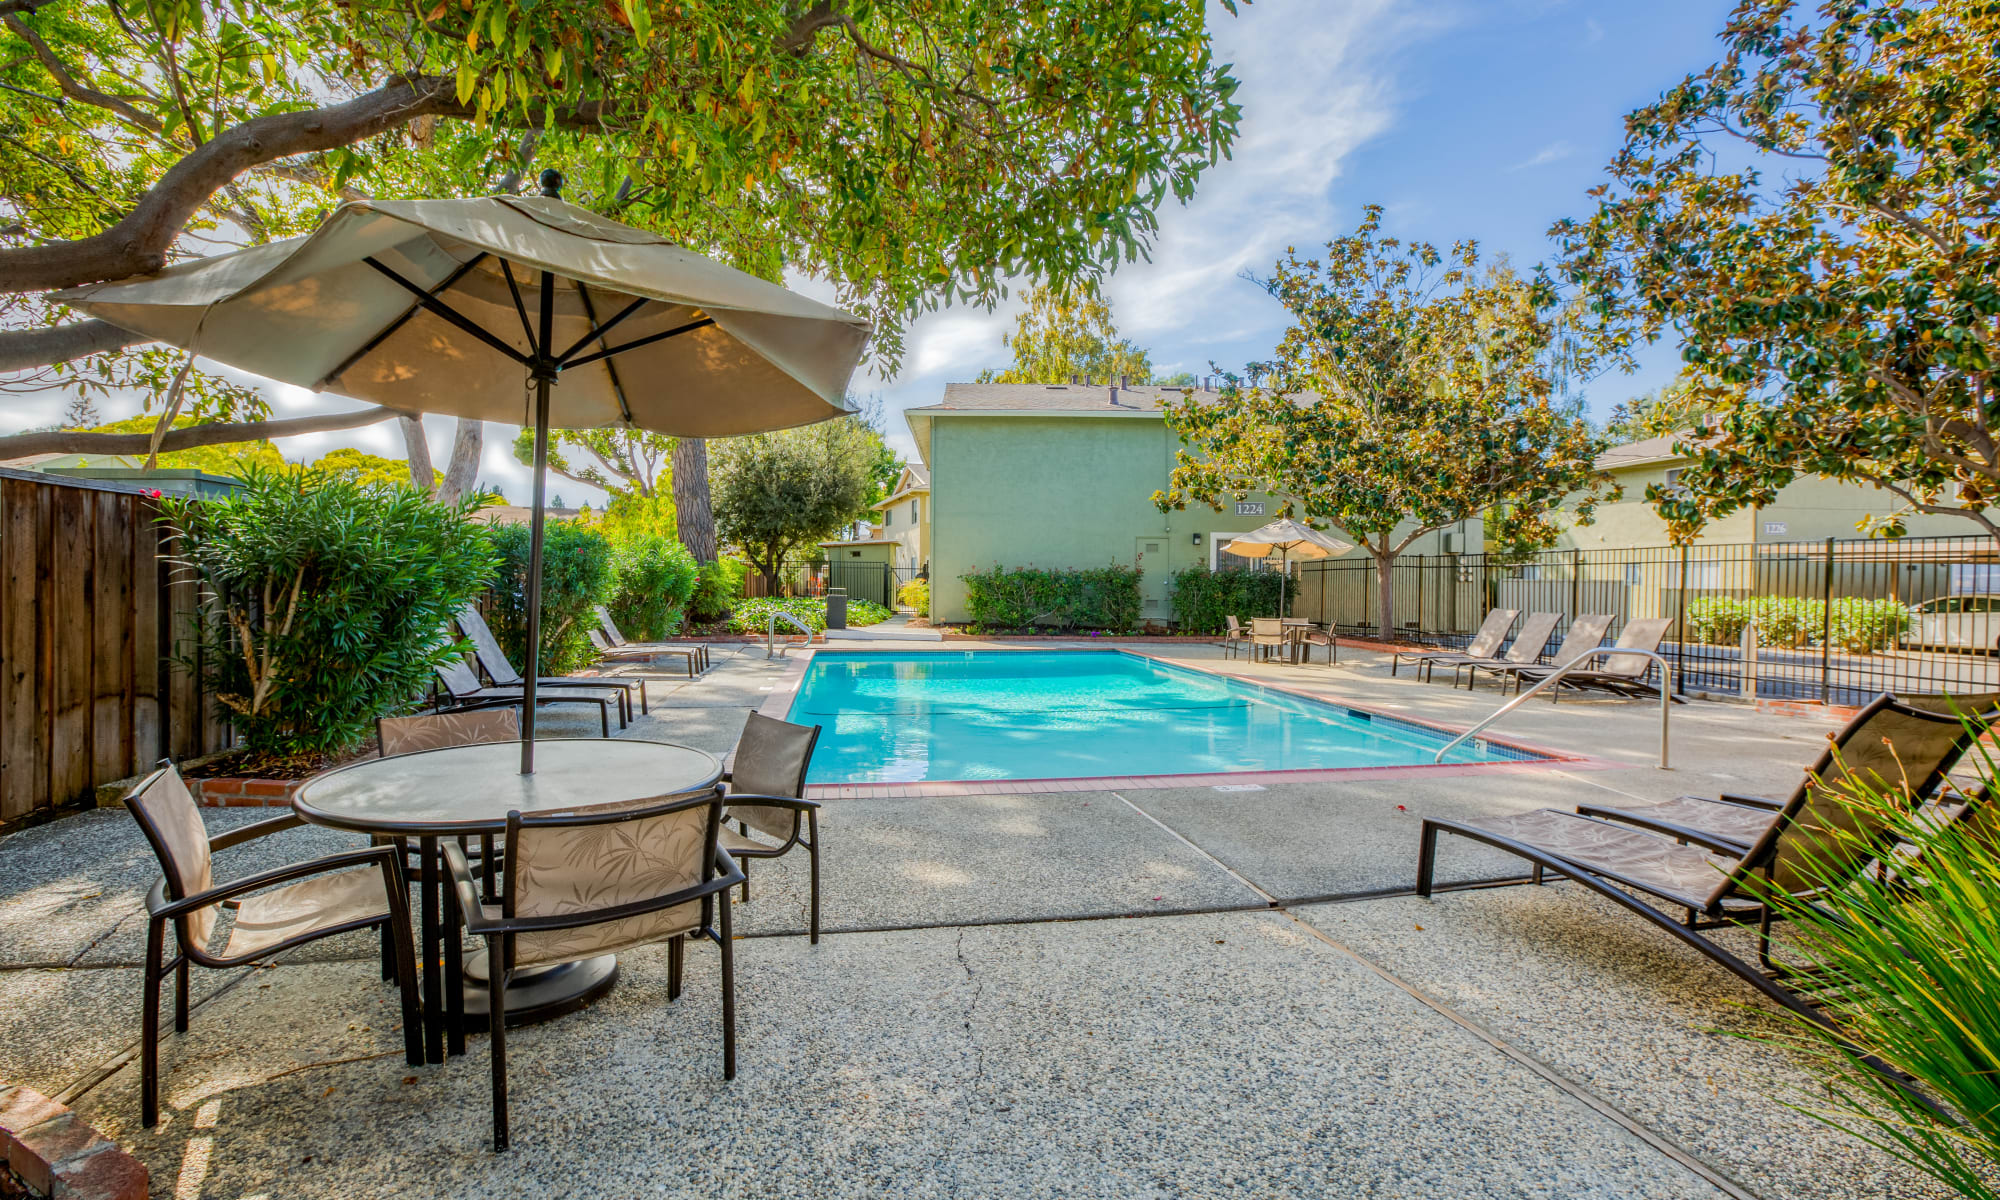 sitting area by pool at Birchwood in Sunnyvale, California